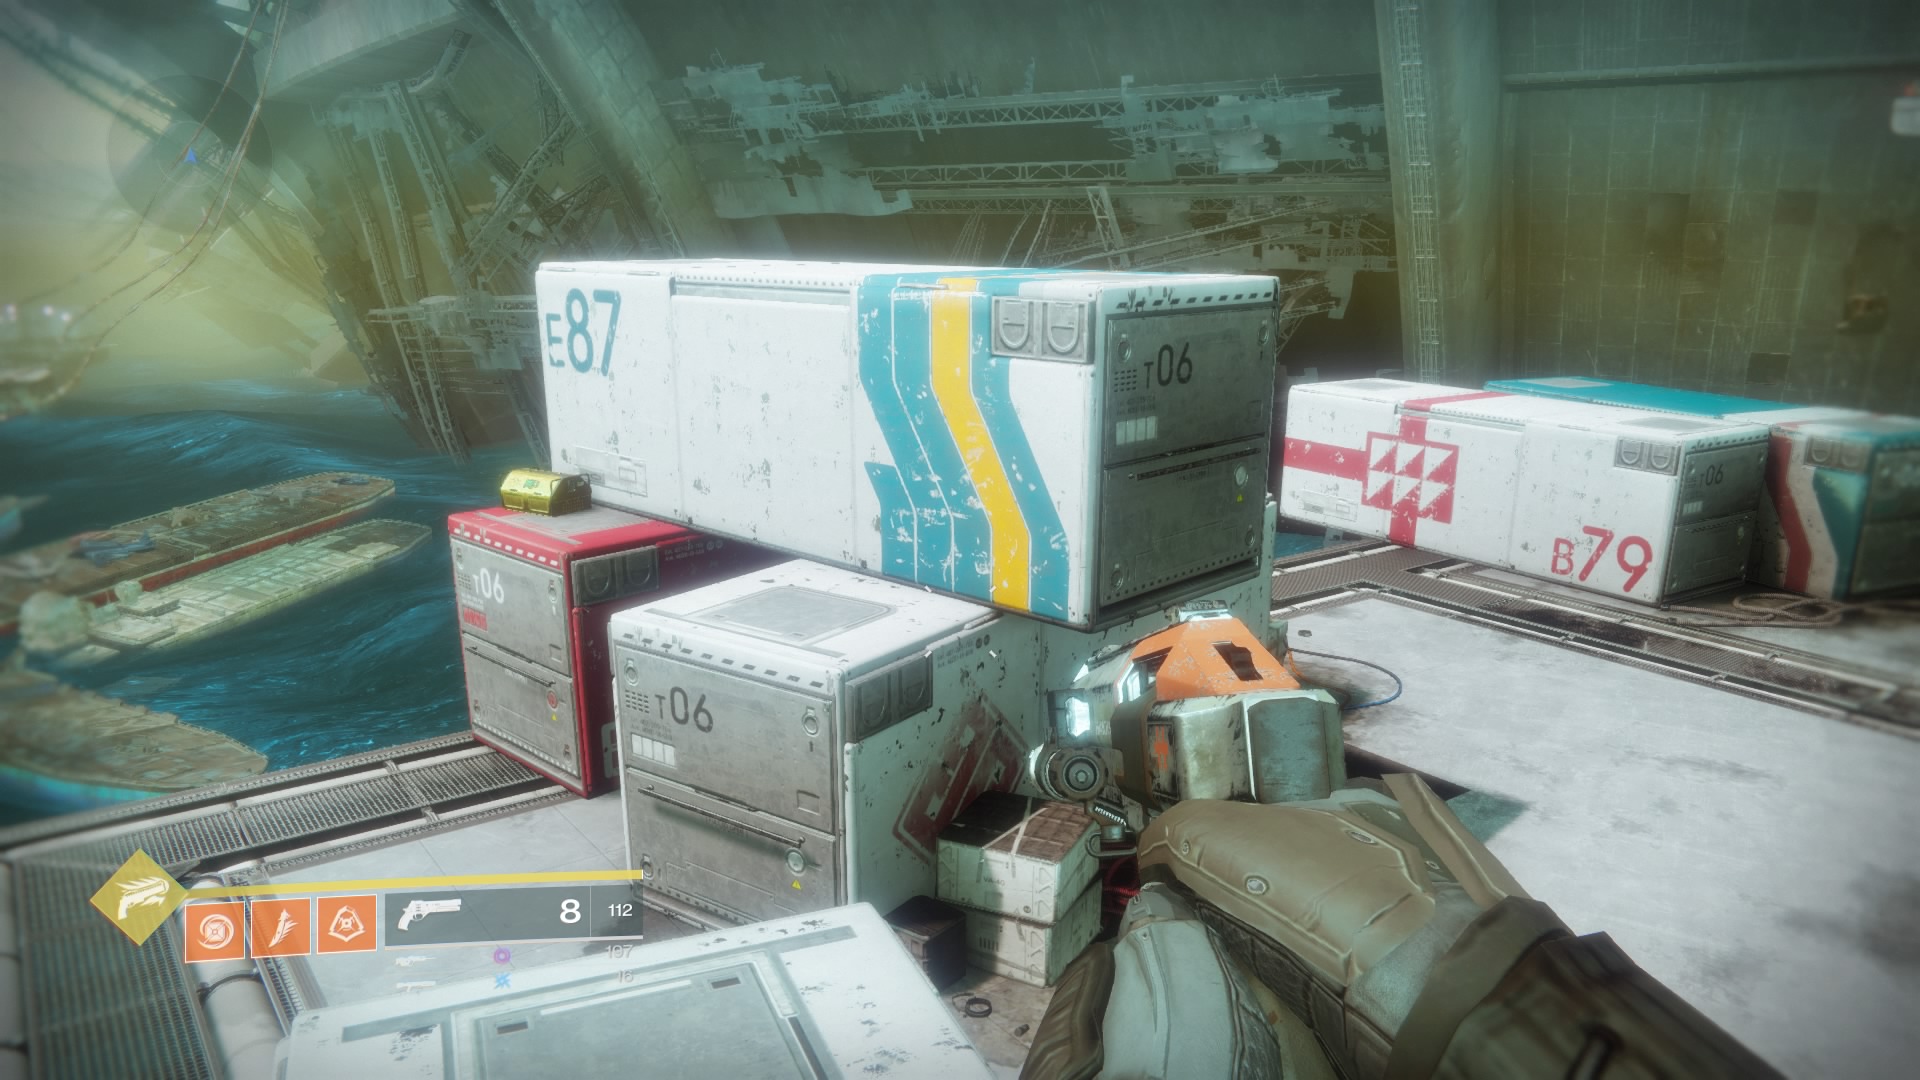 Destiny Gold Chest Location 1 on Earth, Dock 13